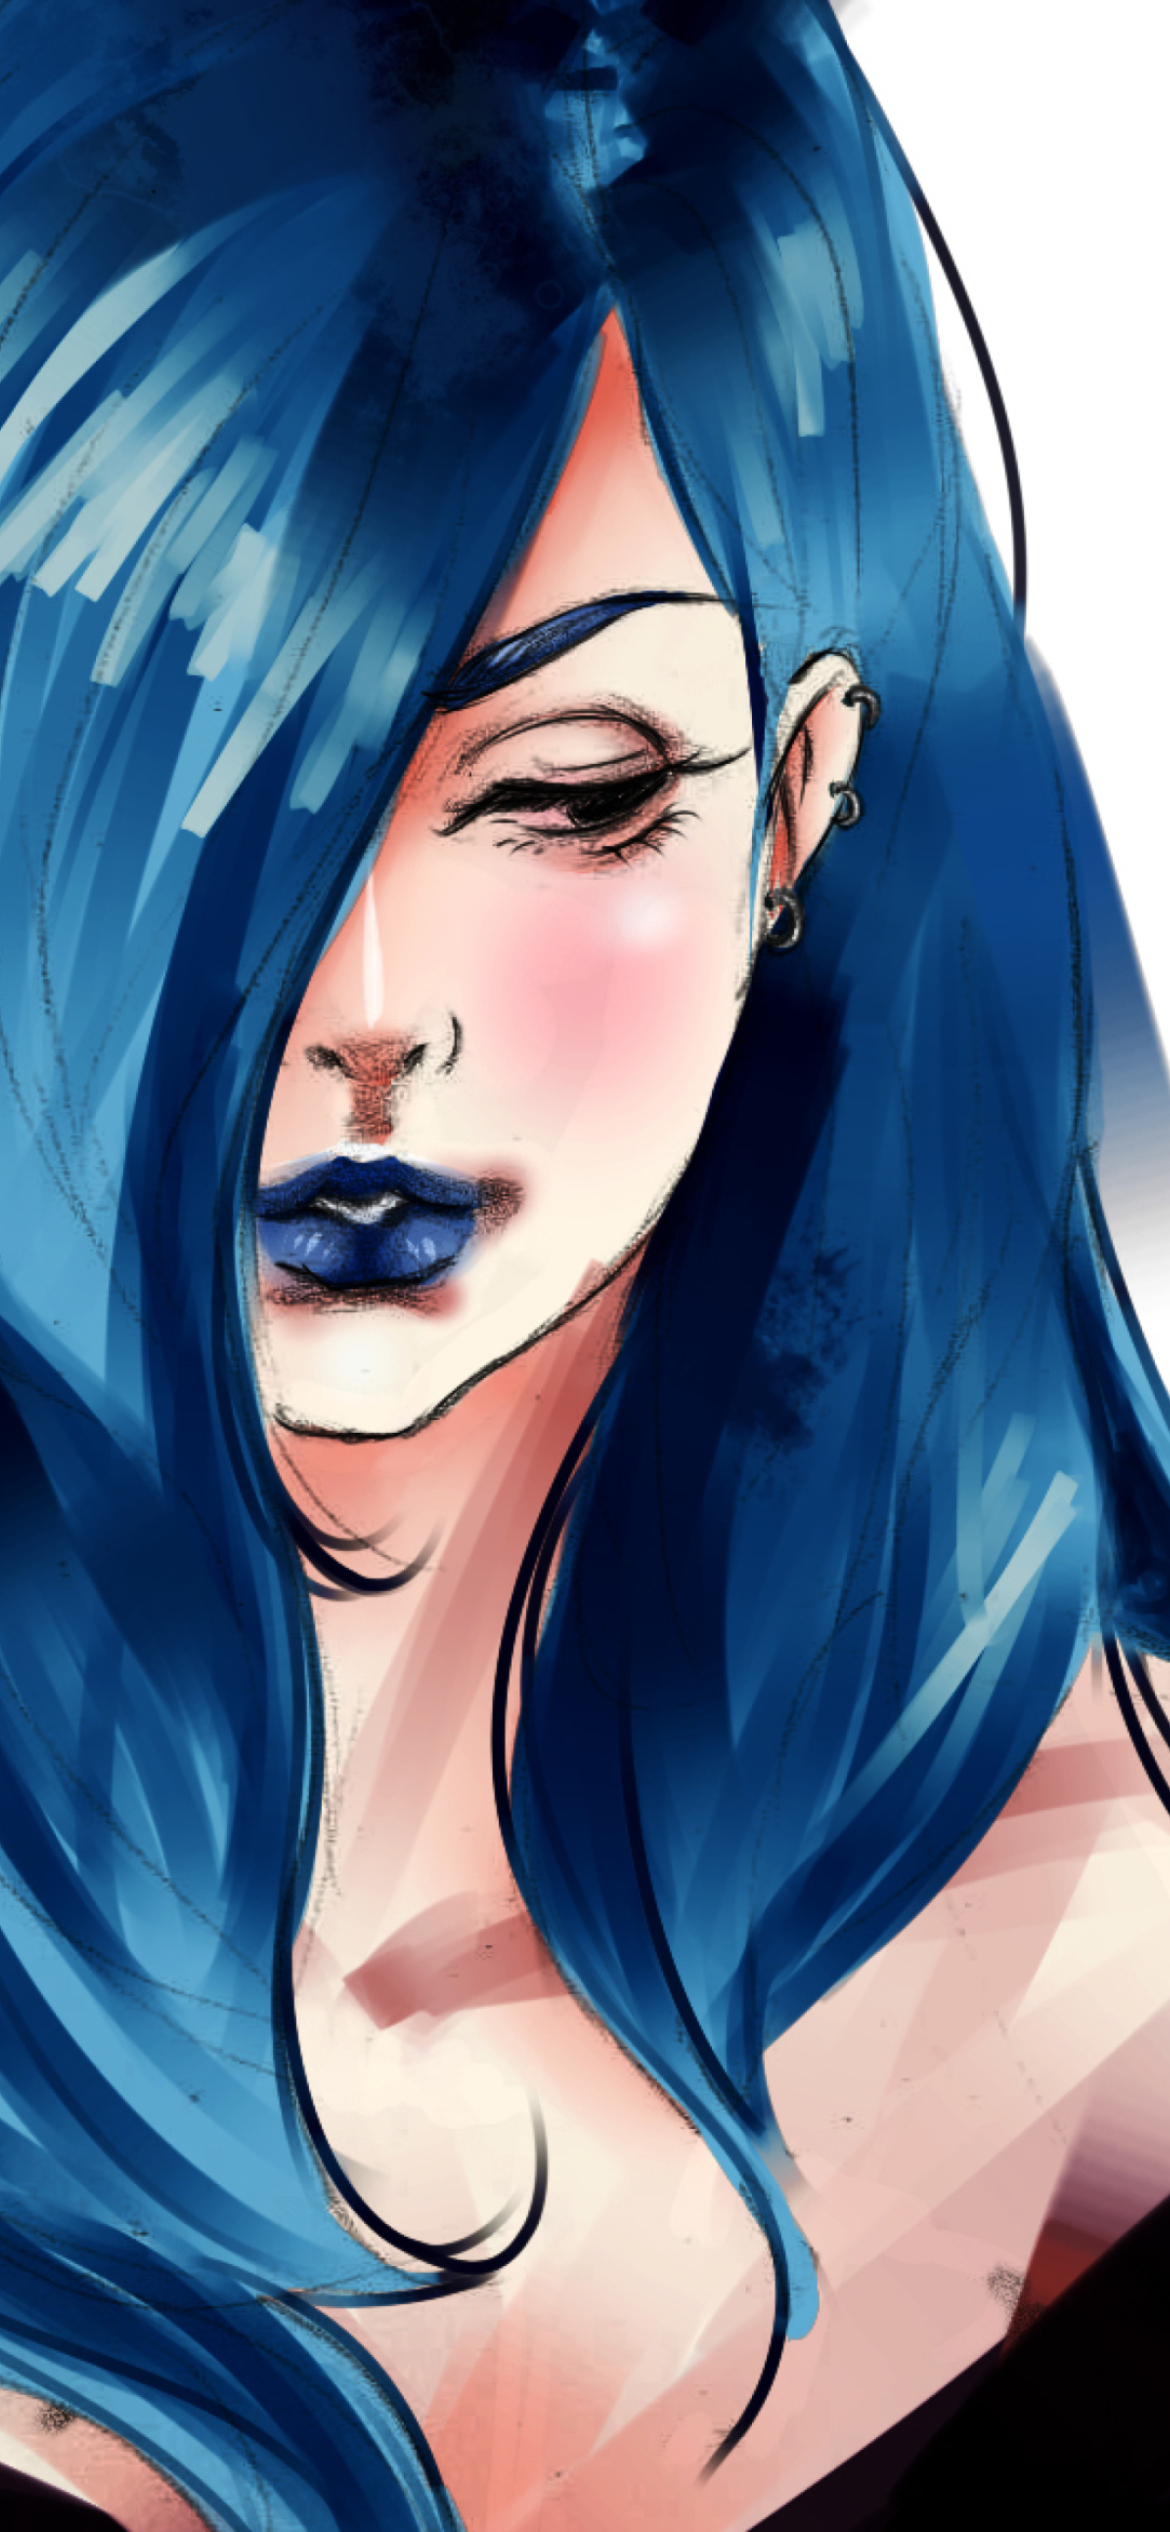 Das Girl With Blue Hair Painting Wallpaper 1170x2532